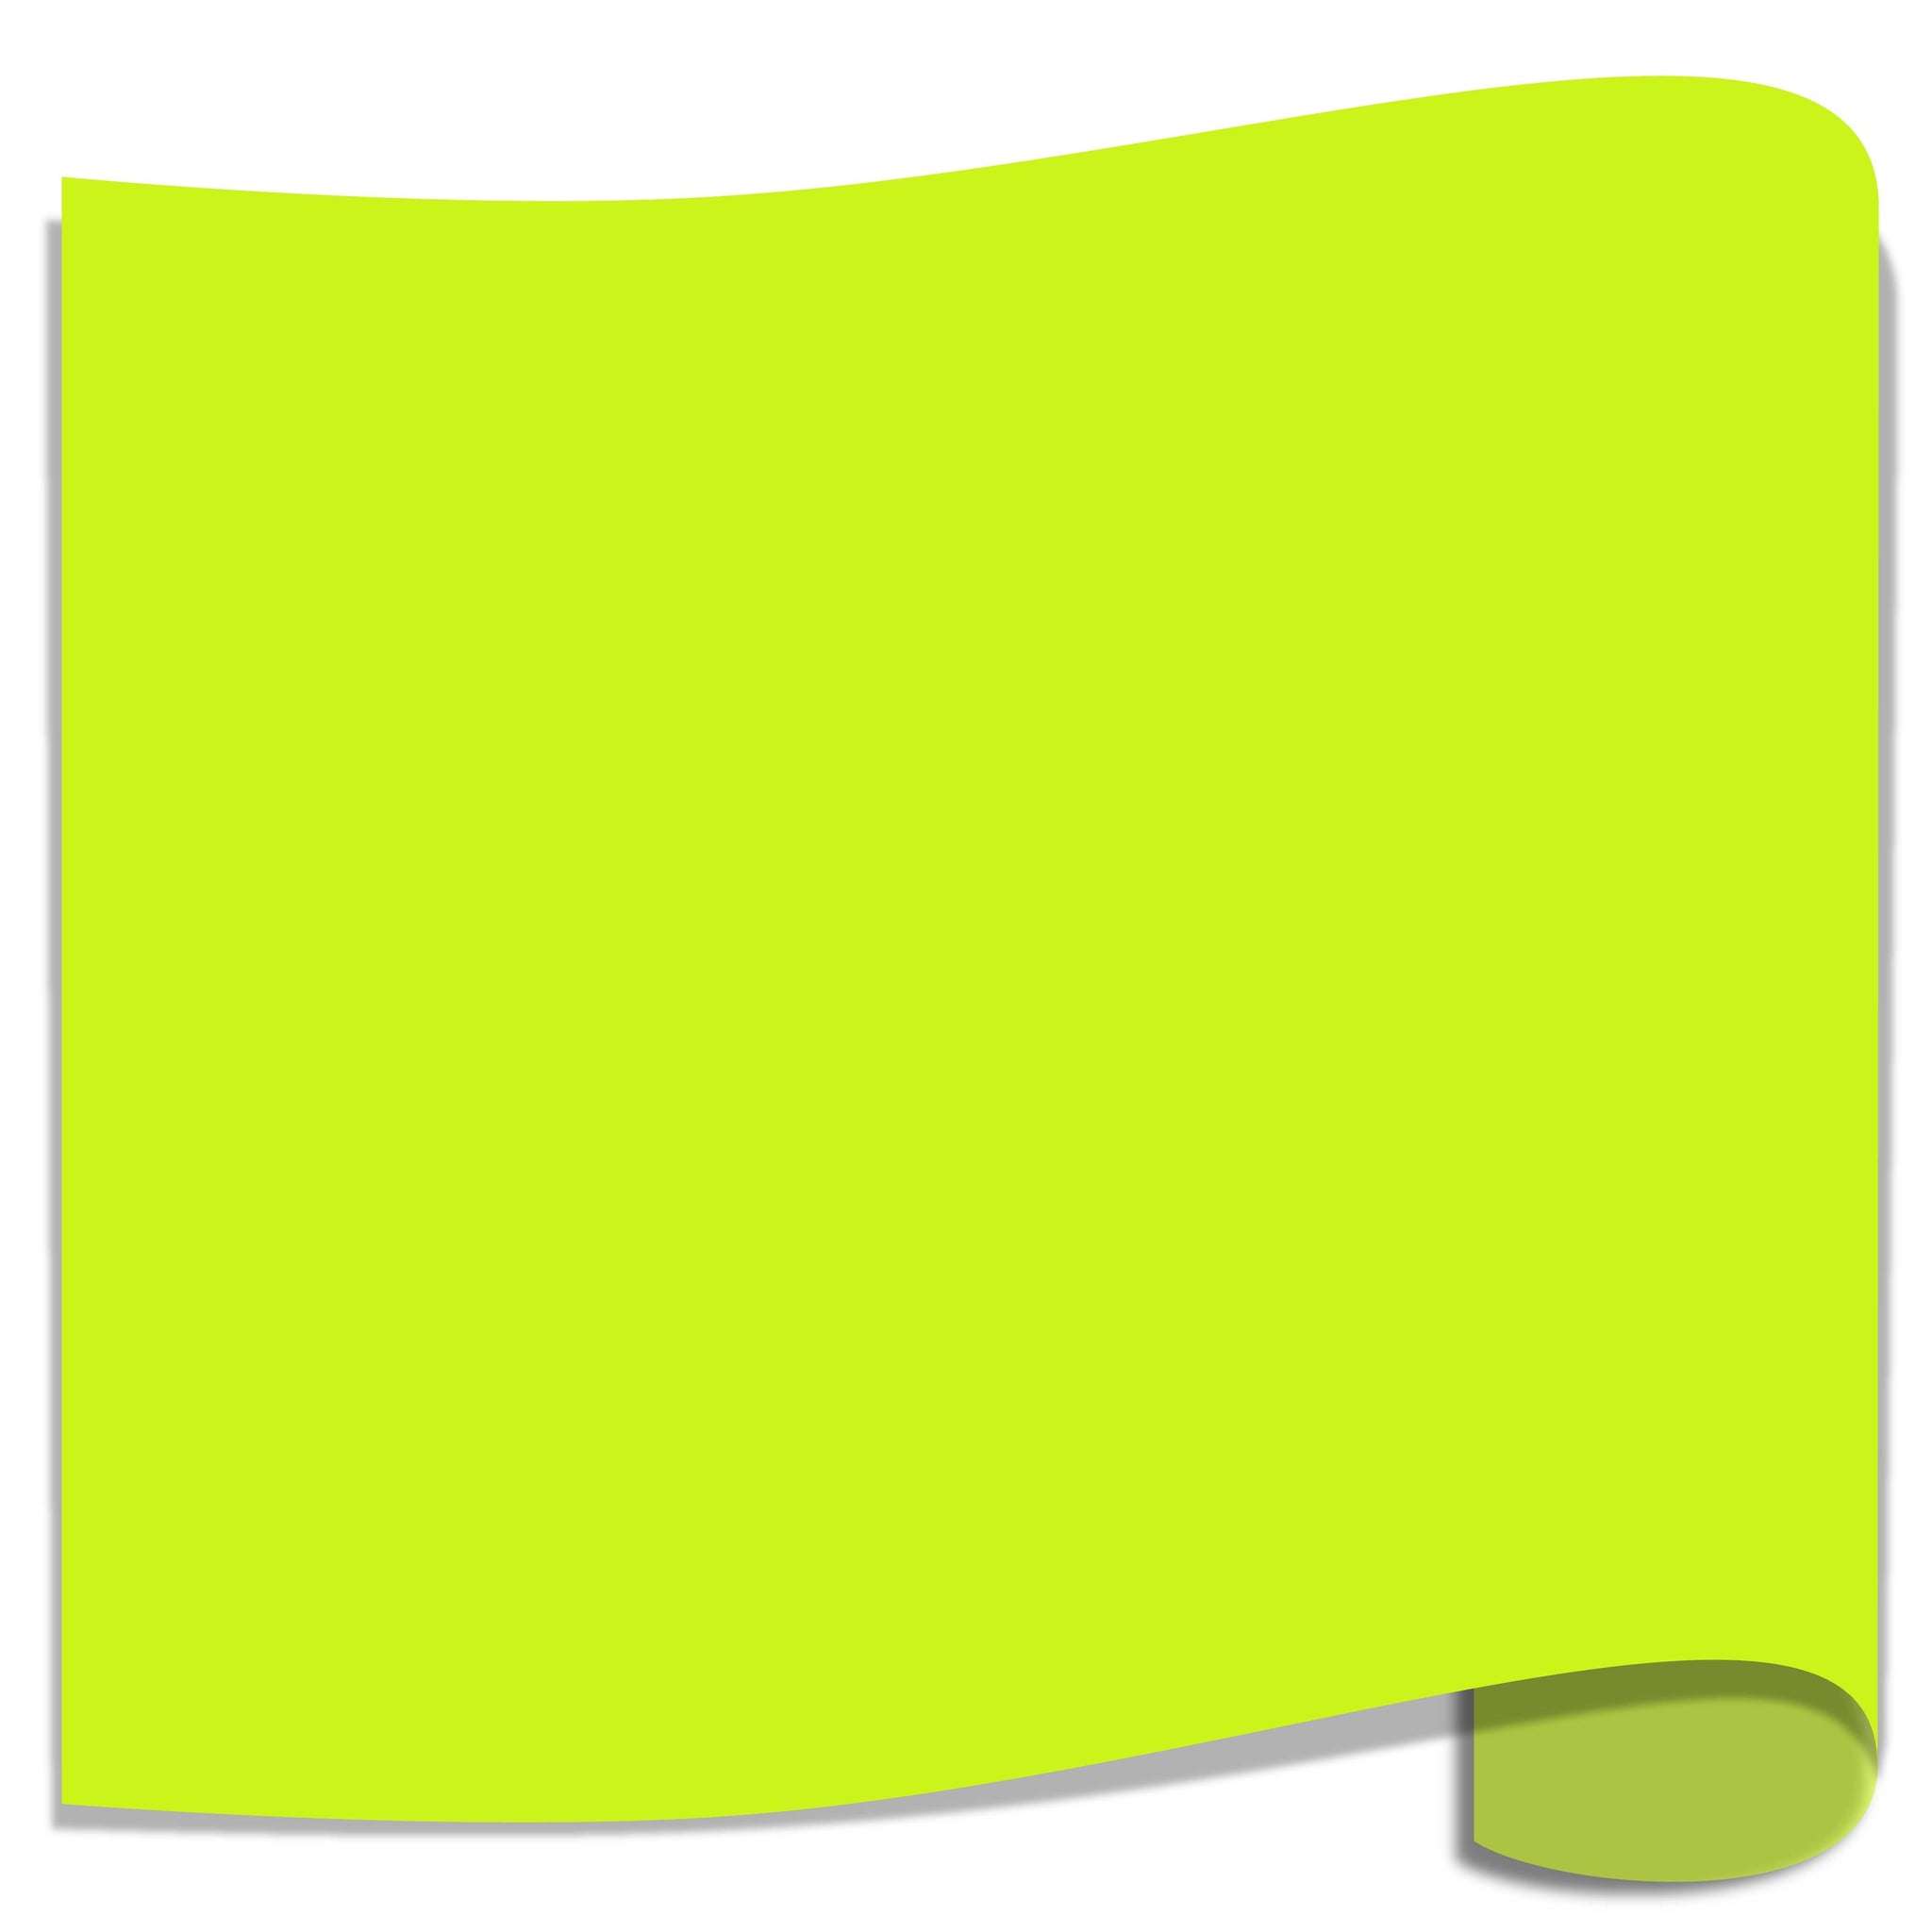 Siser EasyWeed HTV: 12 x 5 Foot Roll - Fluorescent Yellow